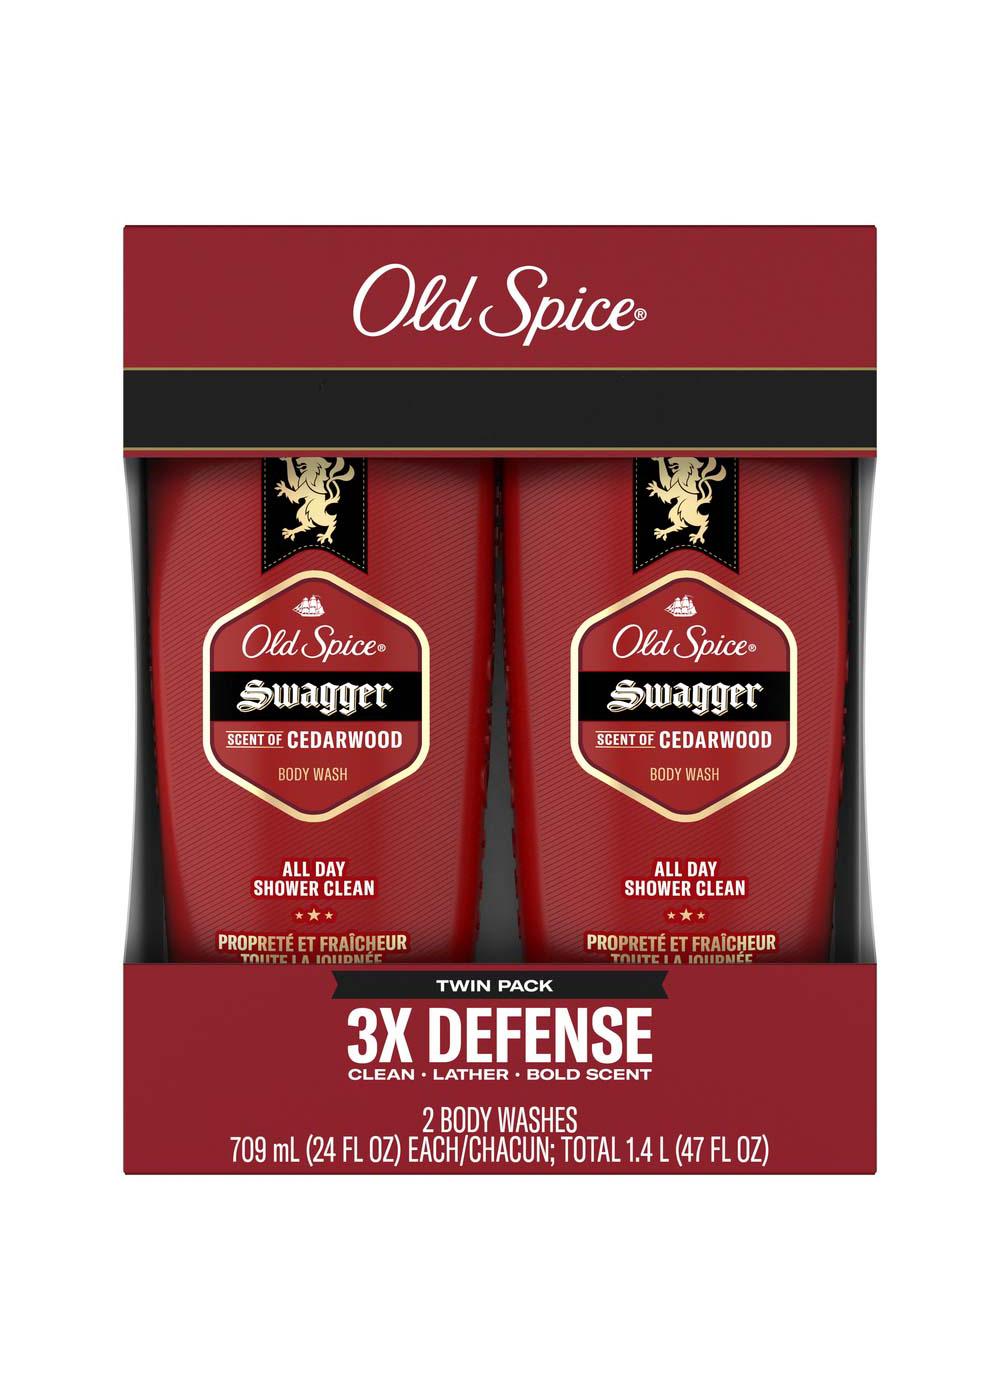 Old Spice Body Wash - Swagger; image 1 of 3